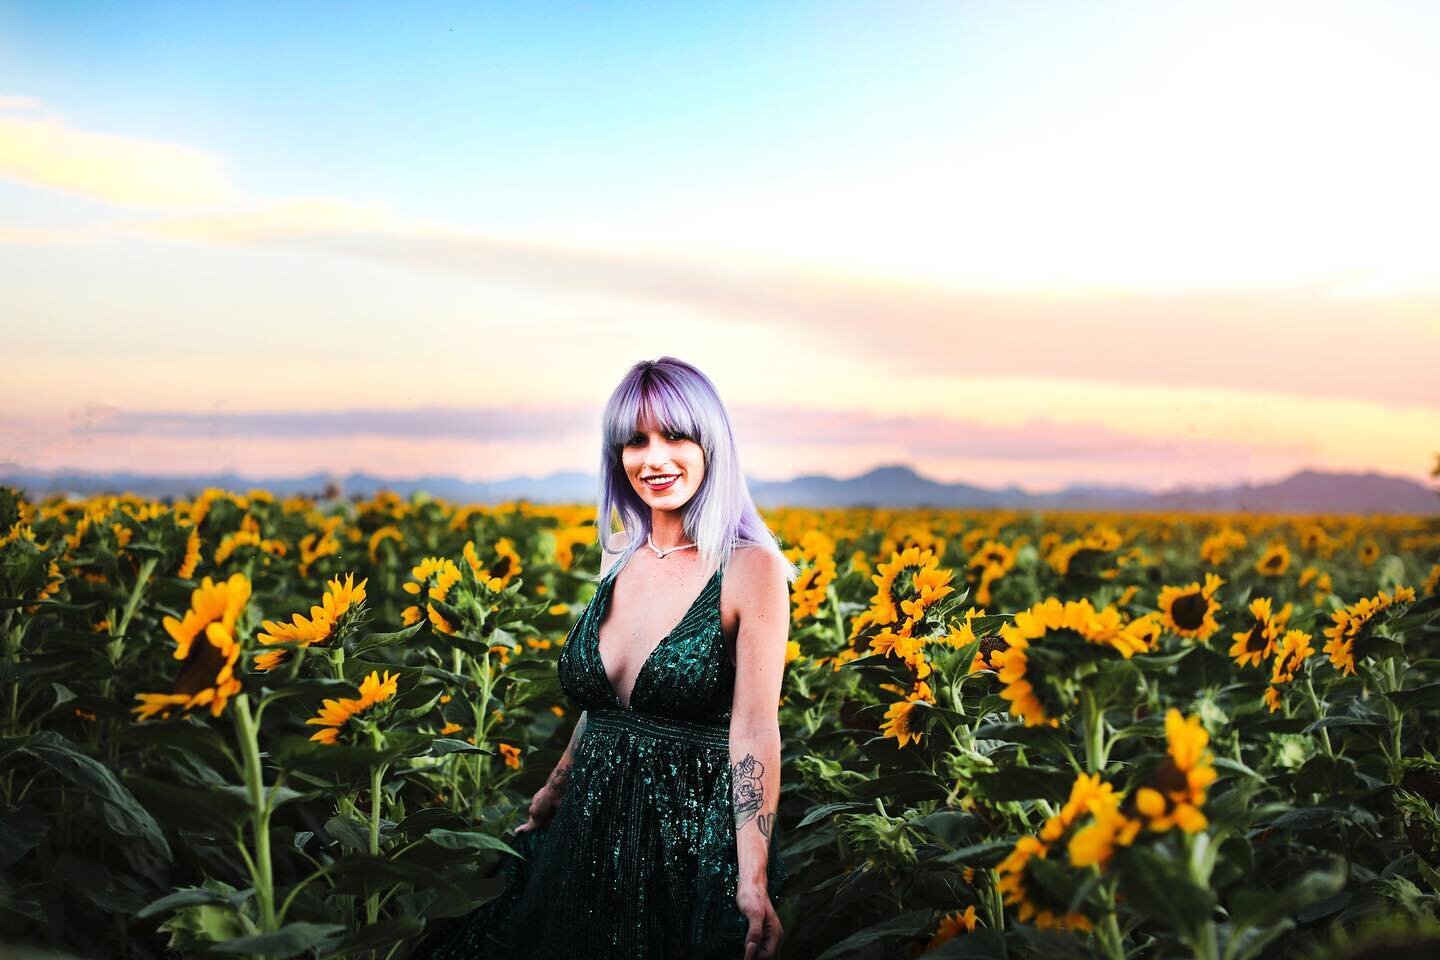 Taylor at @sweetflowerhome in the sunflowers in Buckeye, AZ.🌻🌻🌻. 

I still have one spot left for Thursday, October 27 at 5:15 pm. $400. Message me! 

#buckeyesunflowers #buckeyeaz #buckeyeazsunflowers #arizonasunflowers #balticborn #balticborndre